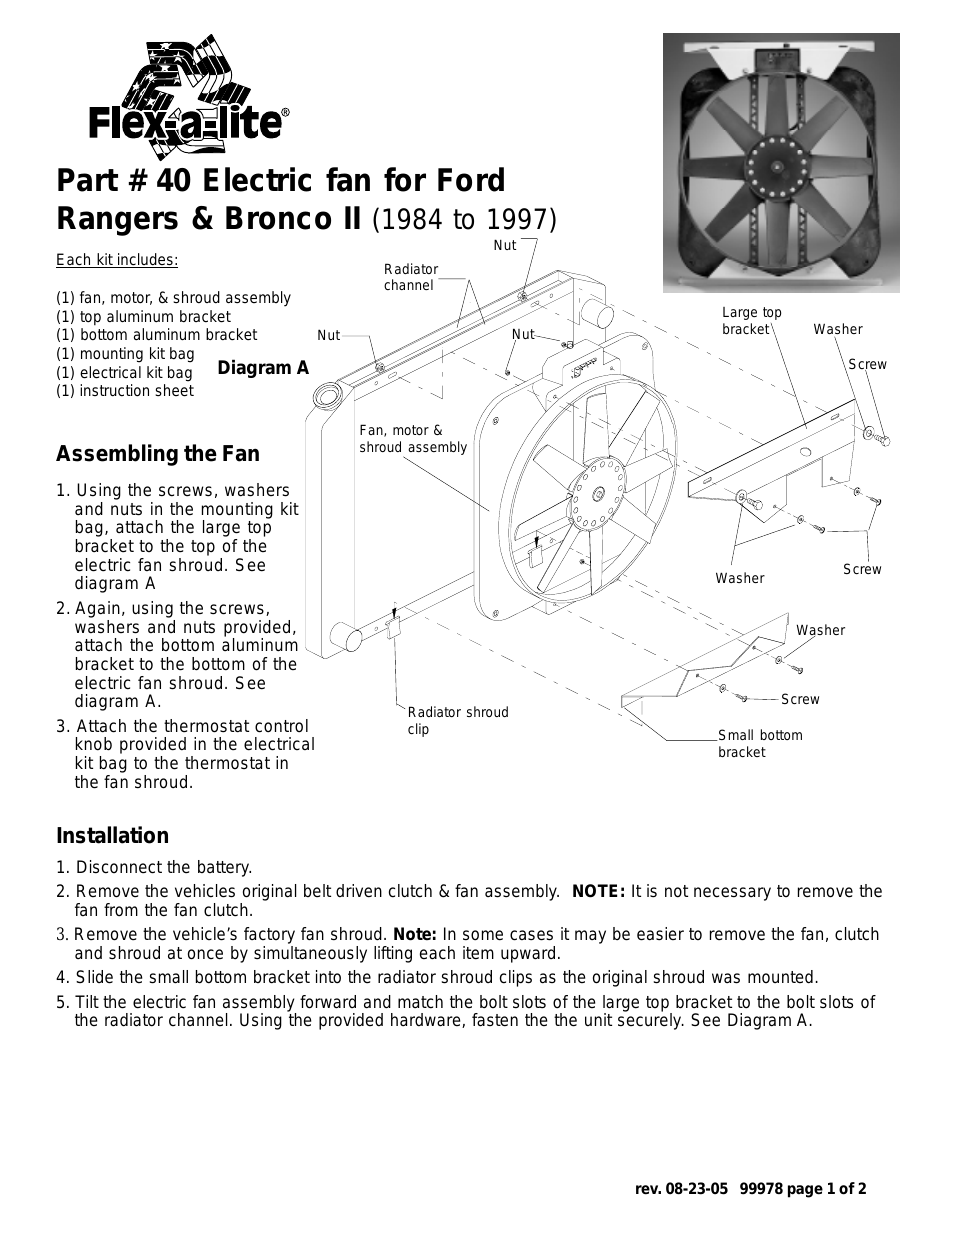 40 Electric fan for Ford Rangers & Bronco II (1984 to 1997)